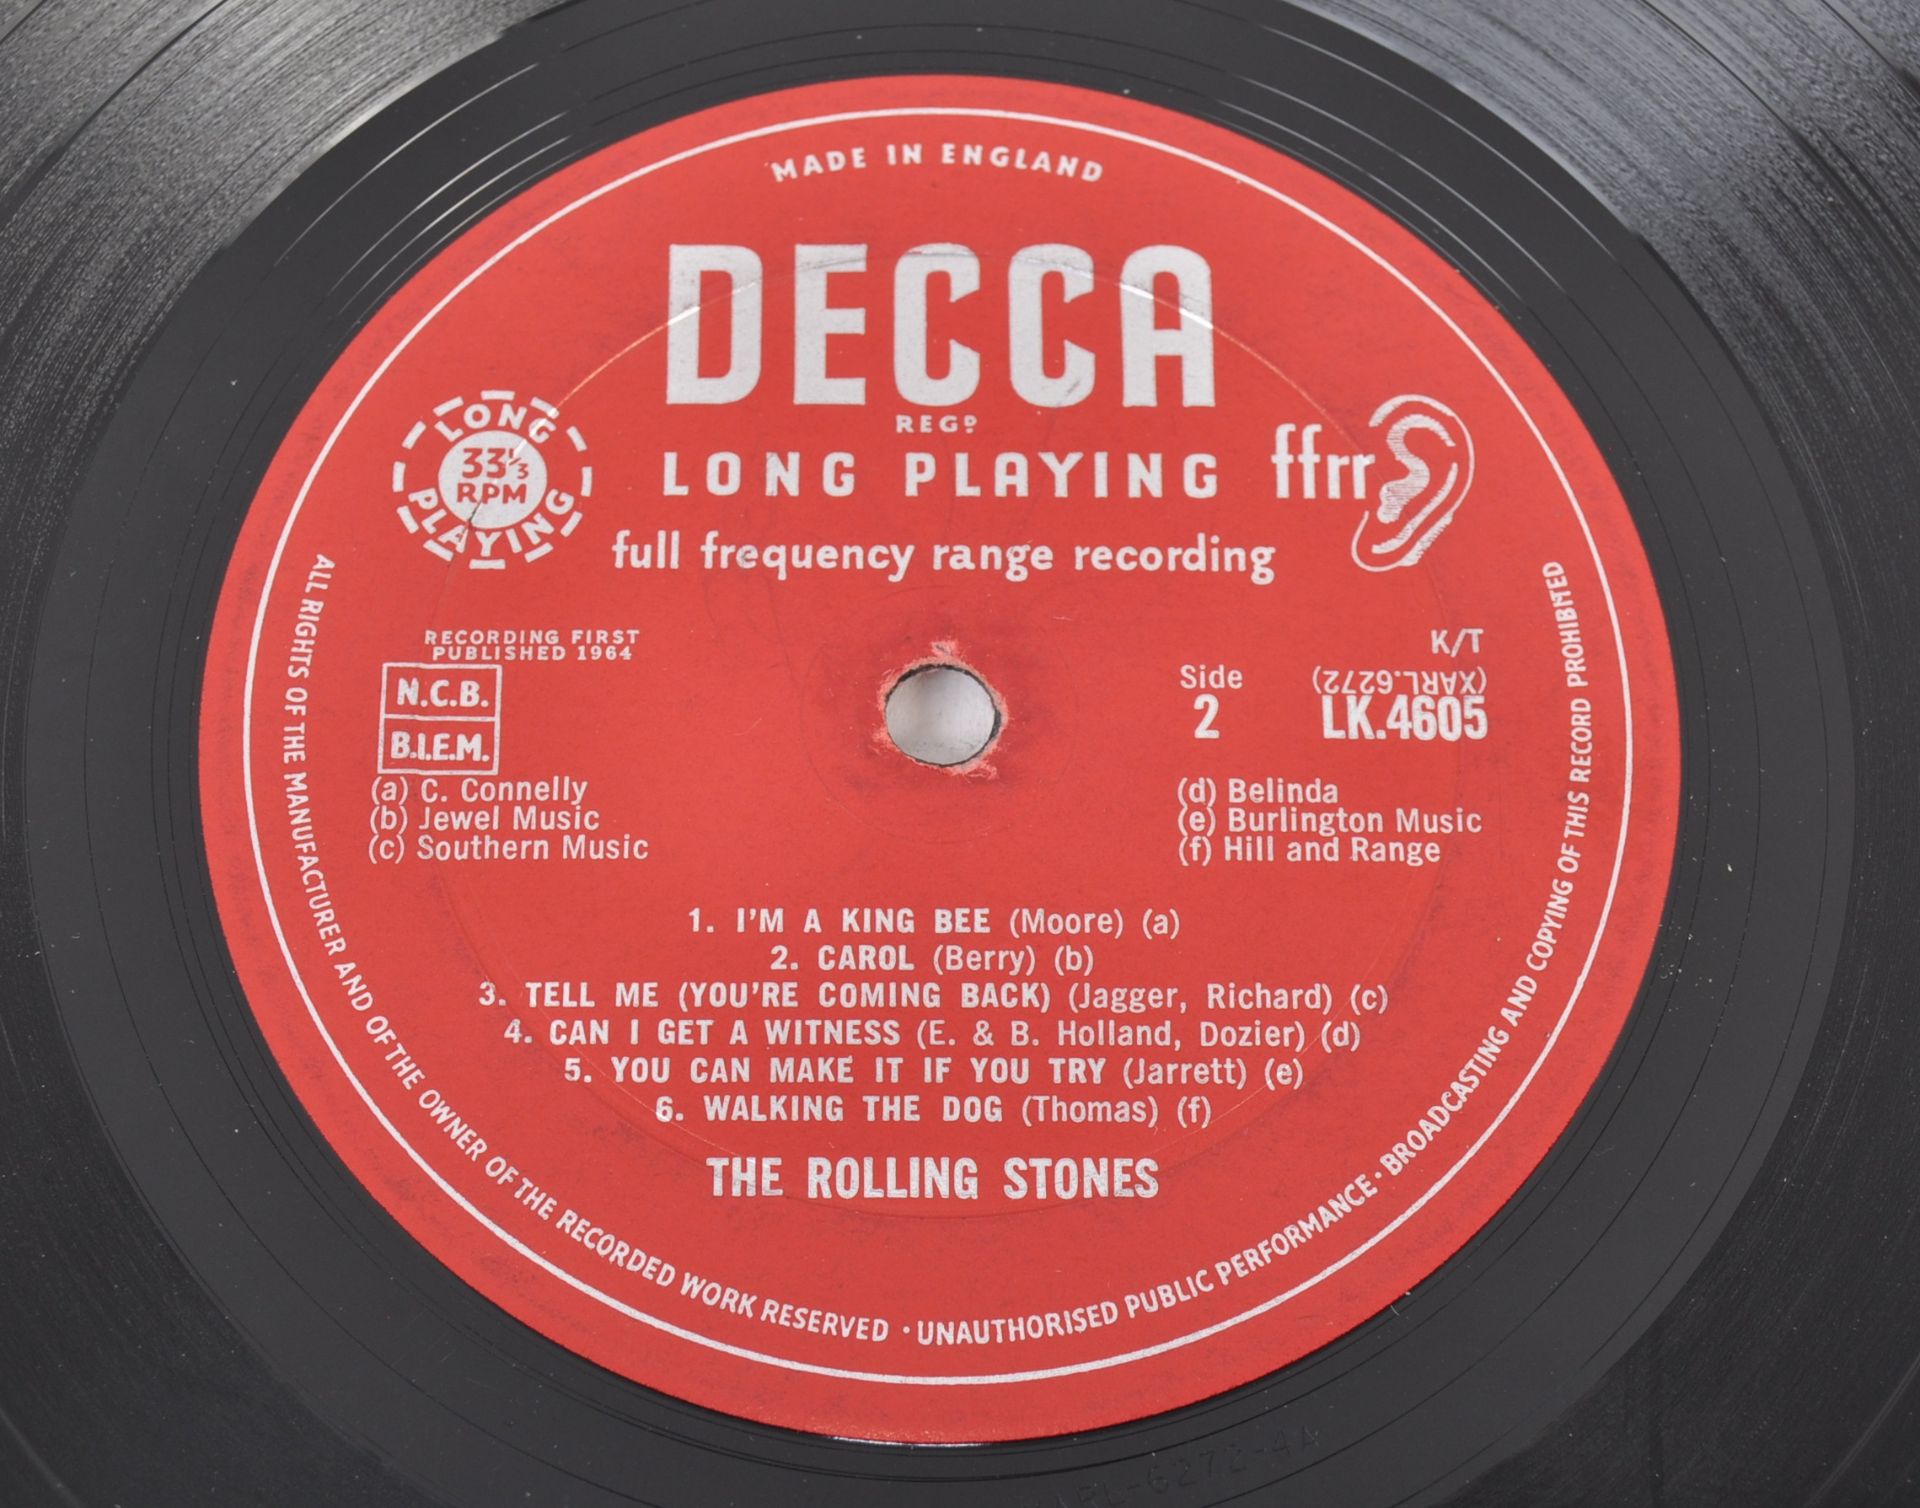 THE ROLLING STONES FIRST ALBUM - 1964 DECCA RELEASE - Image 4 of 4